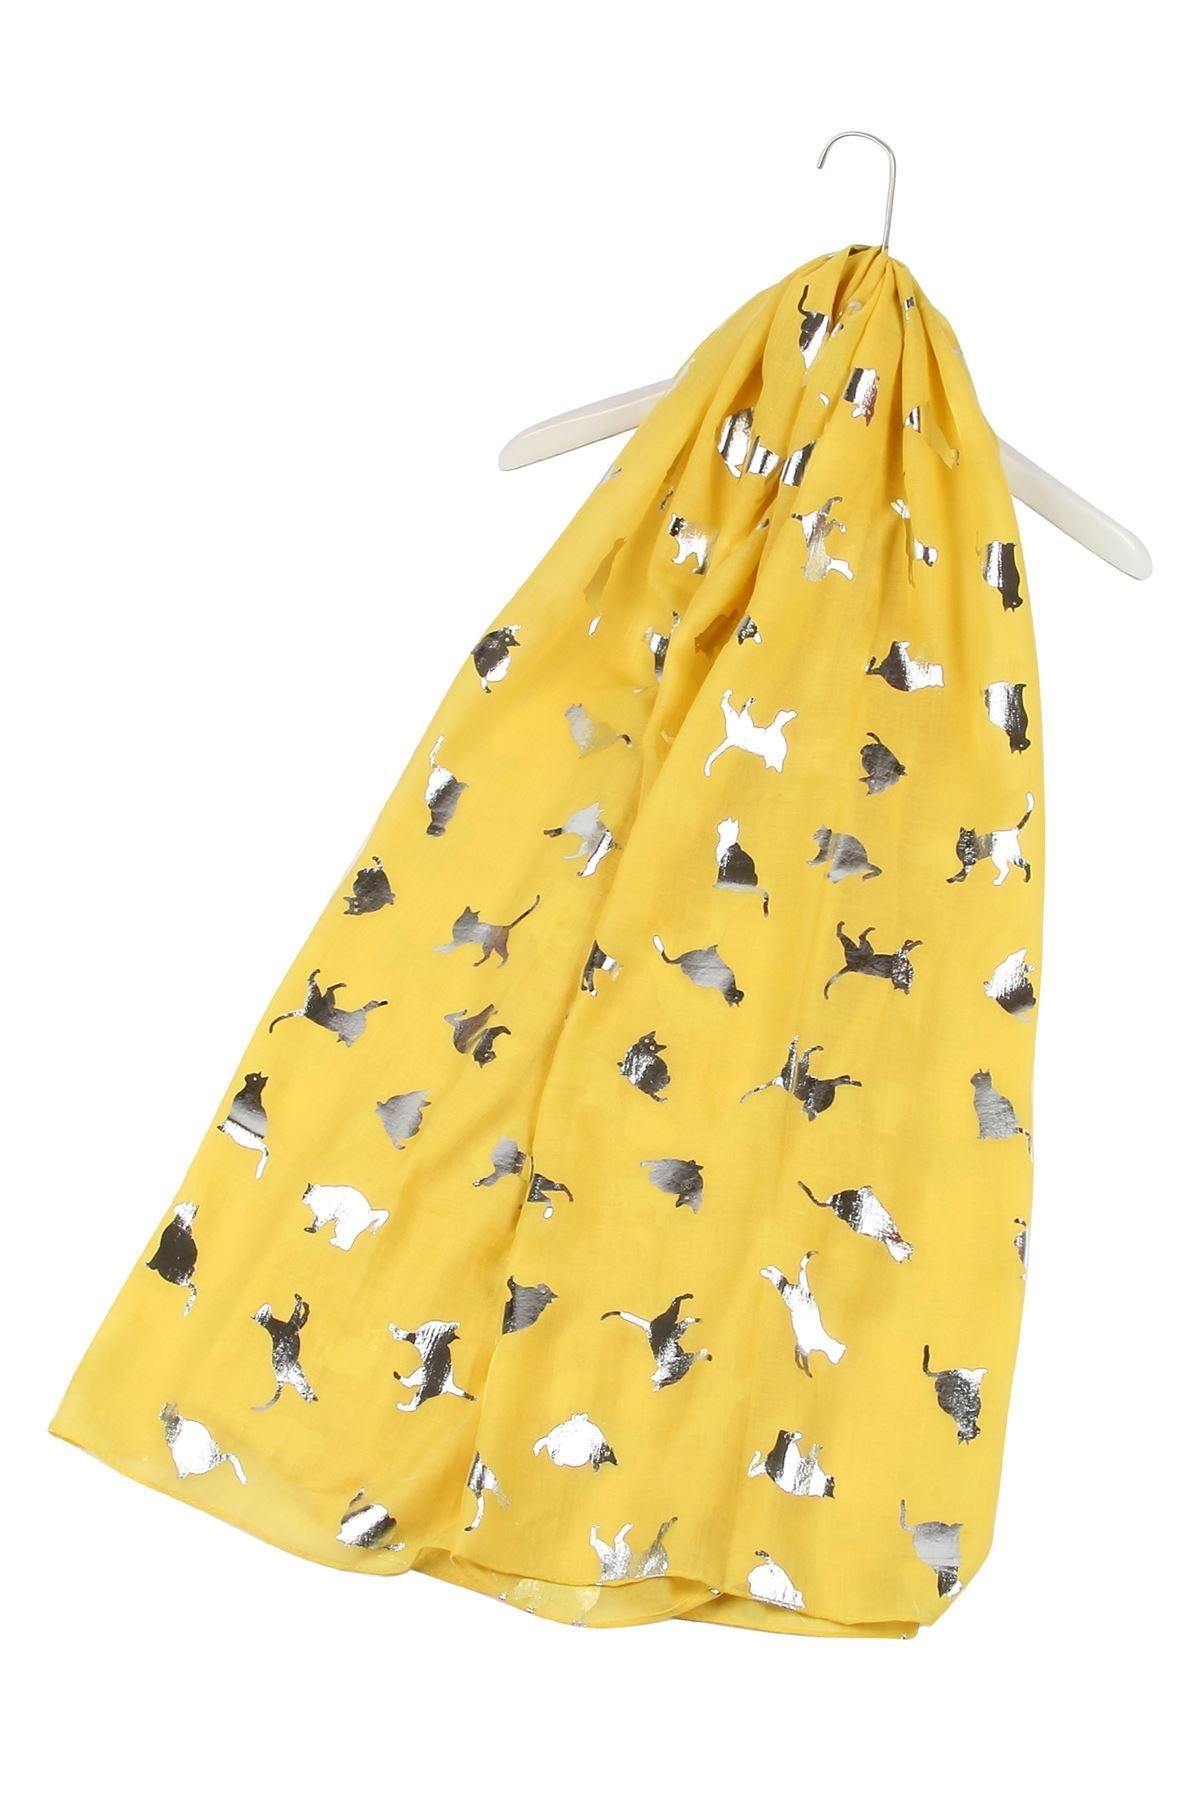 Silver Foiled Cat Print Frayed Scarf - YELLOW